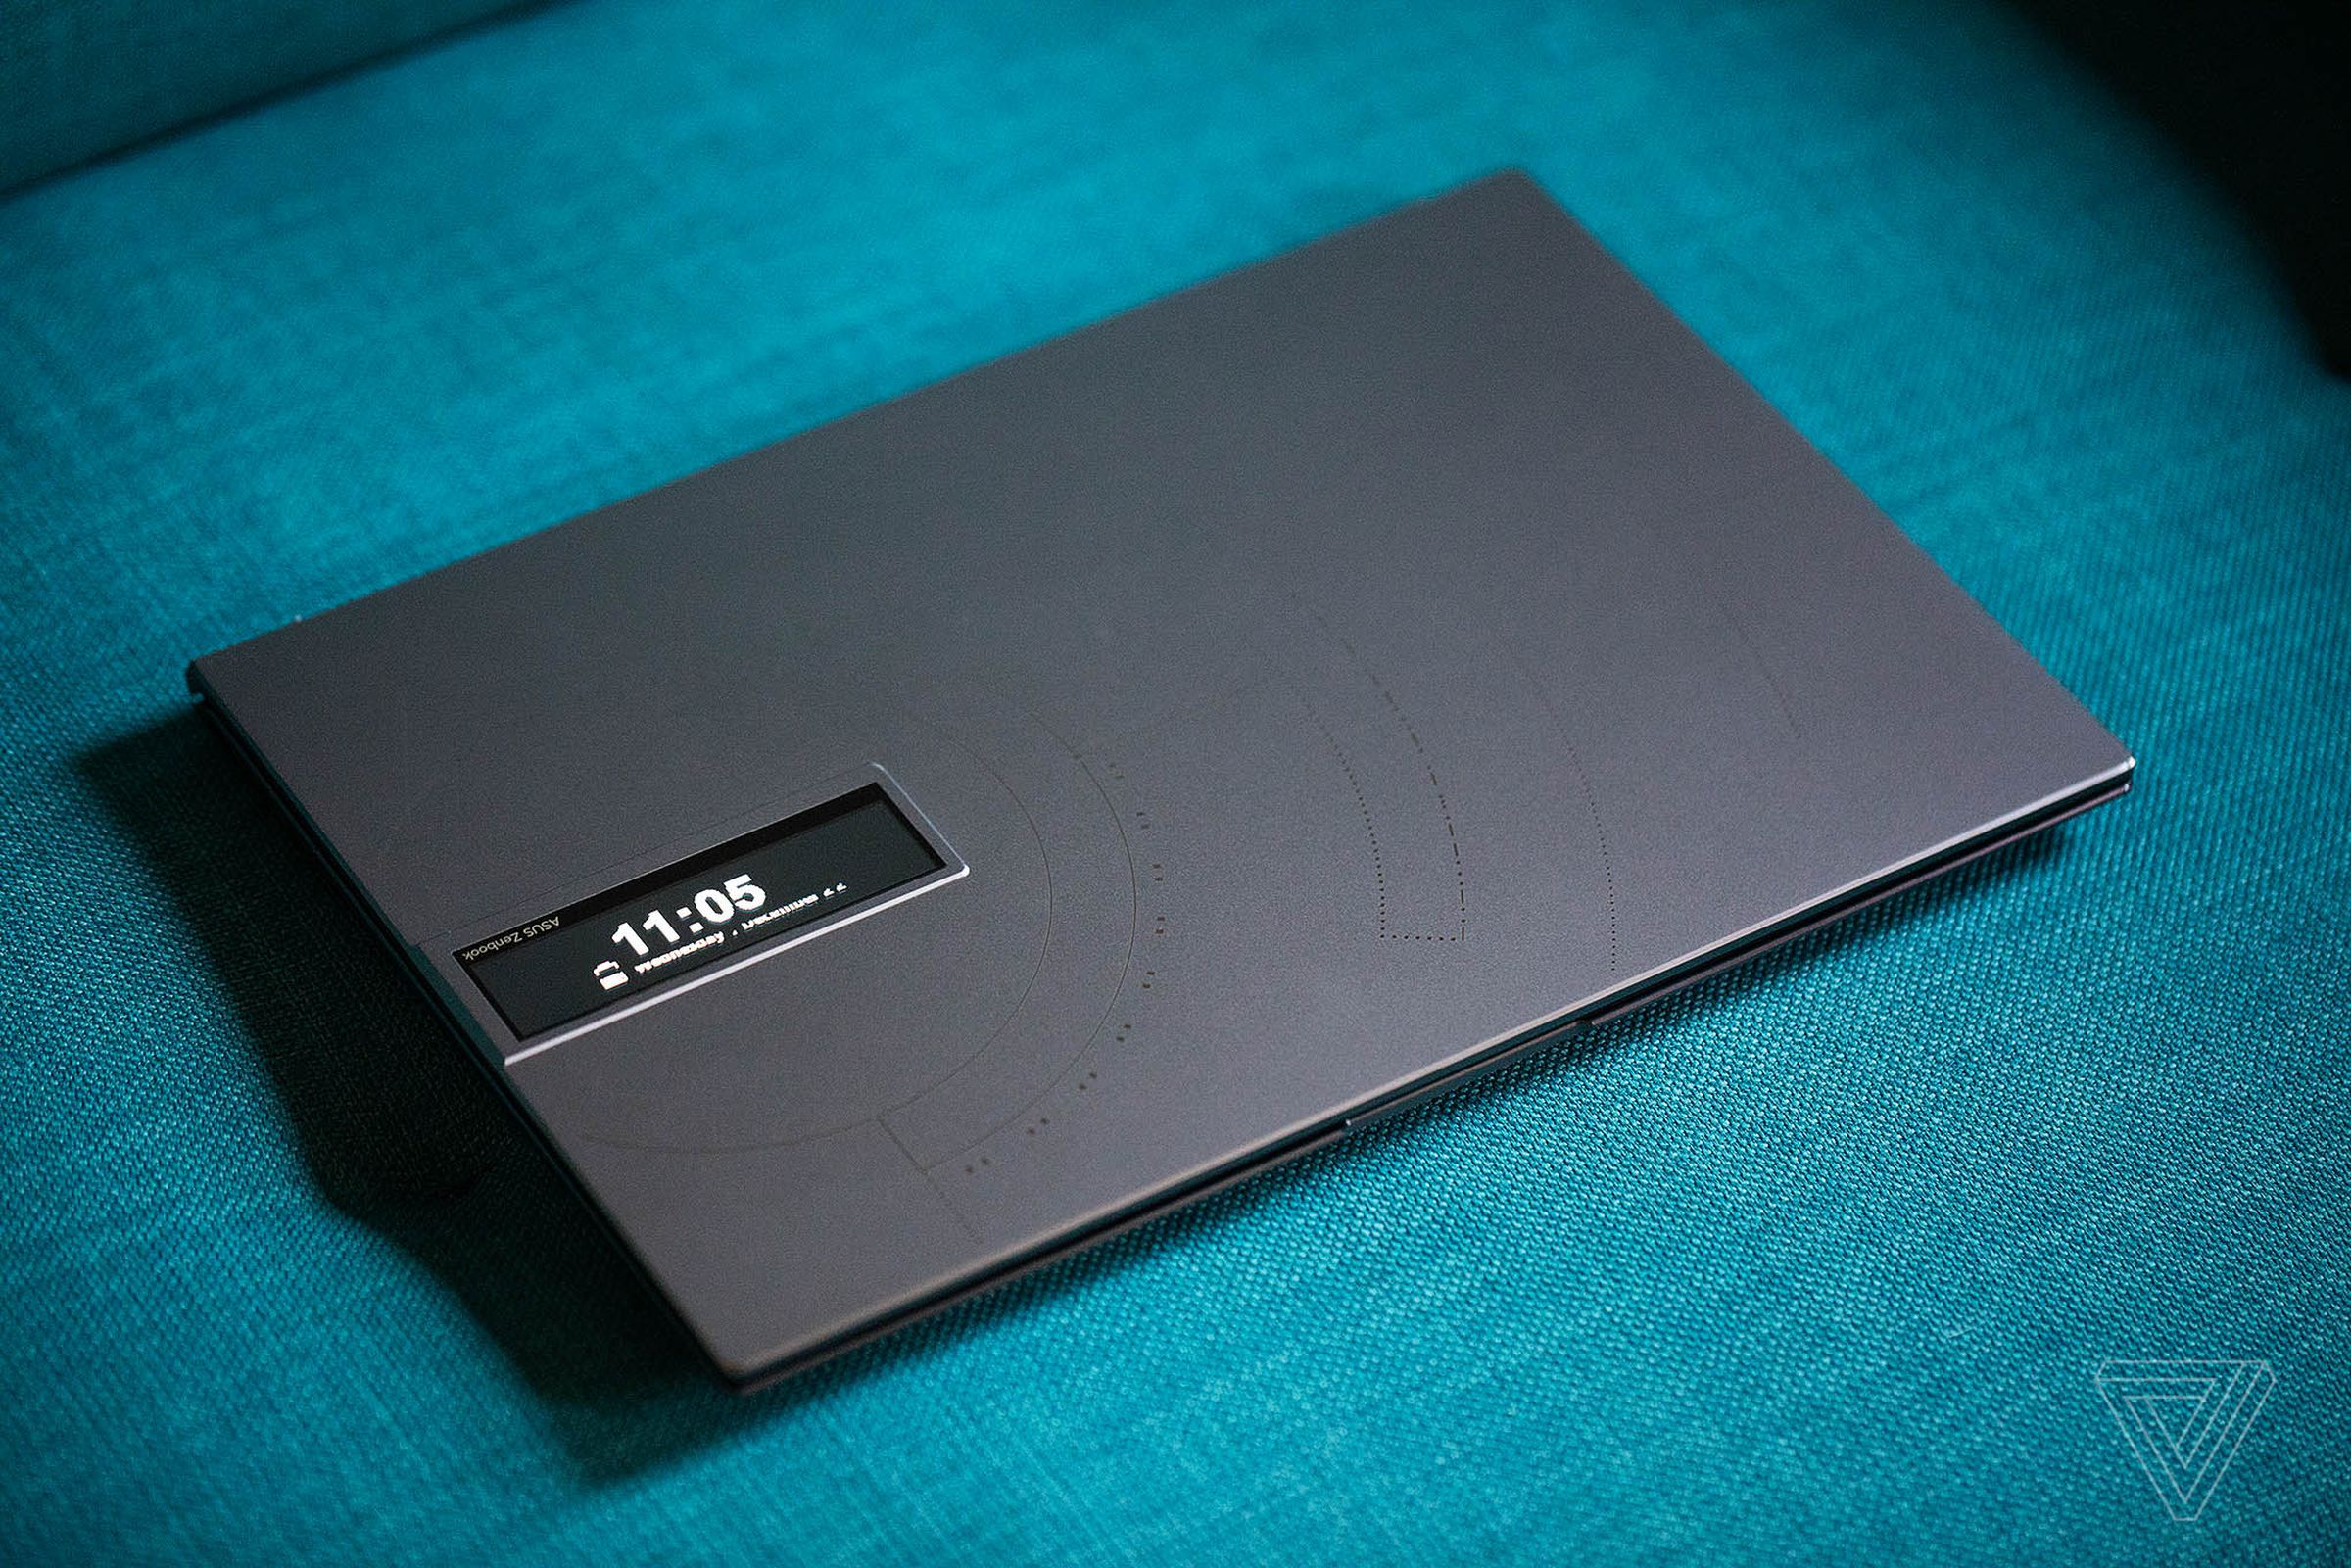 The Asus Zen book 14 OLED Space Edition closed, seen from above, on a green couch.